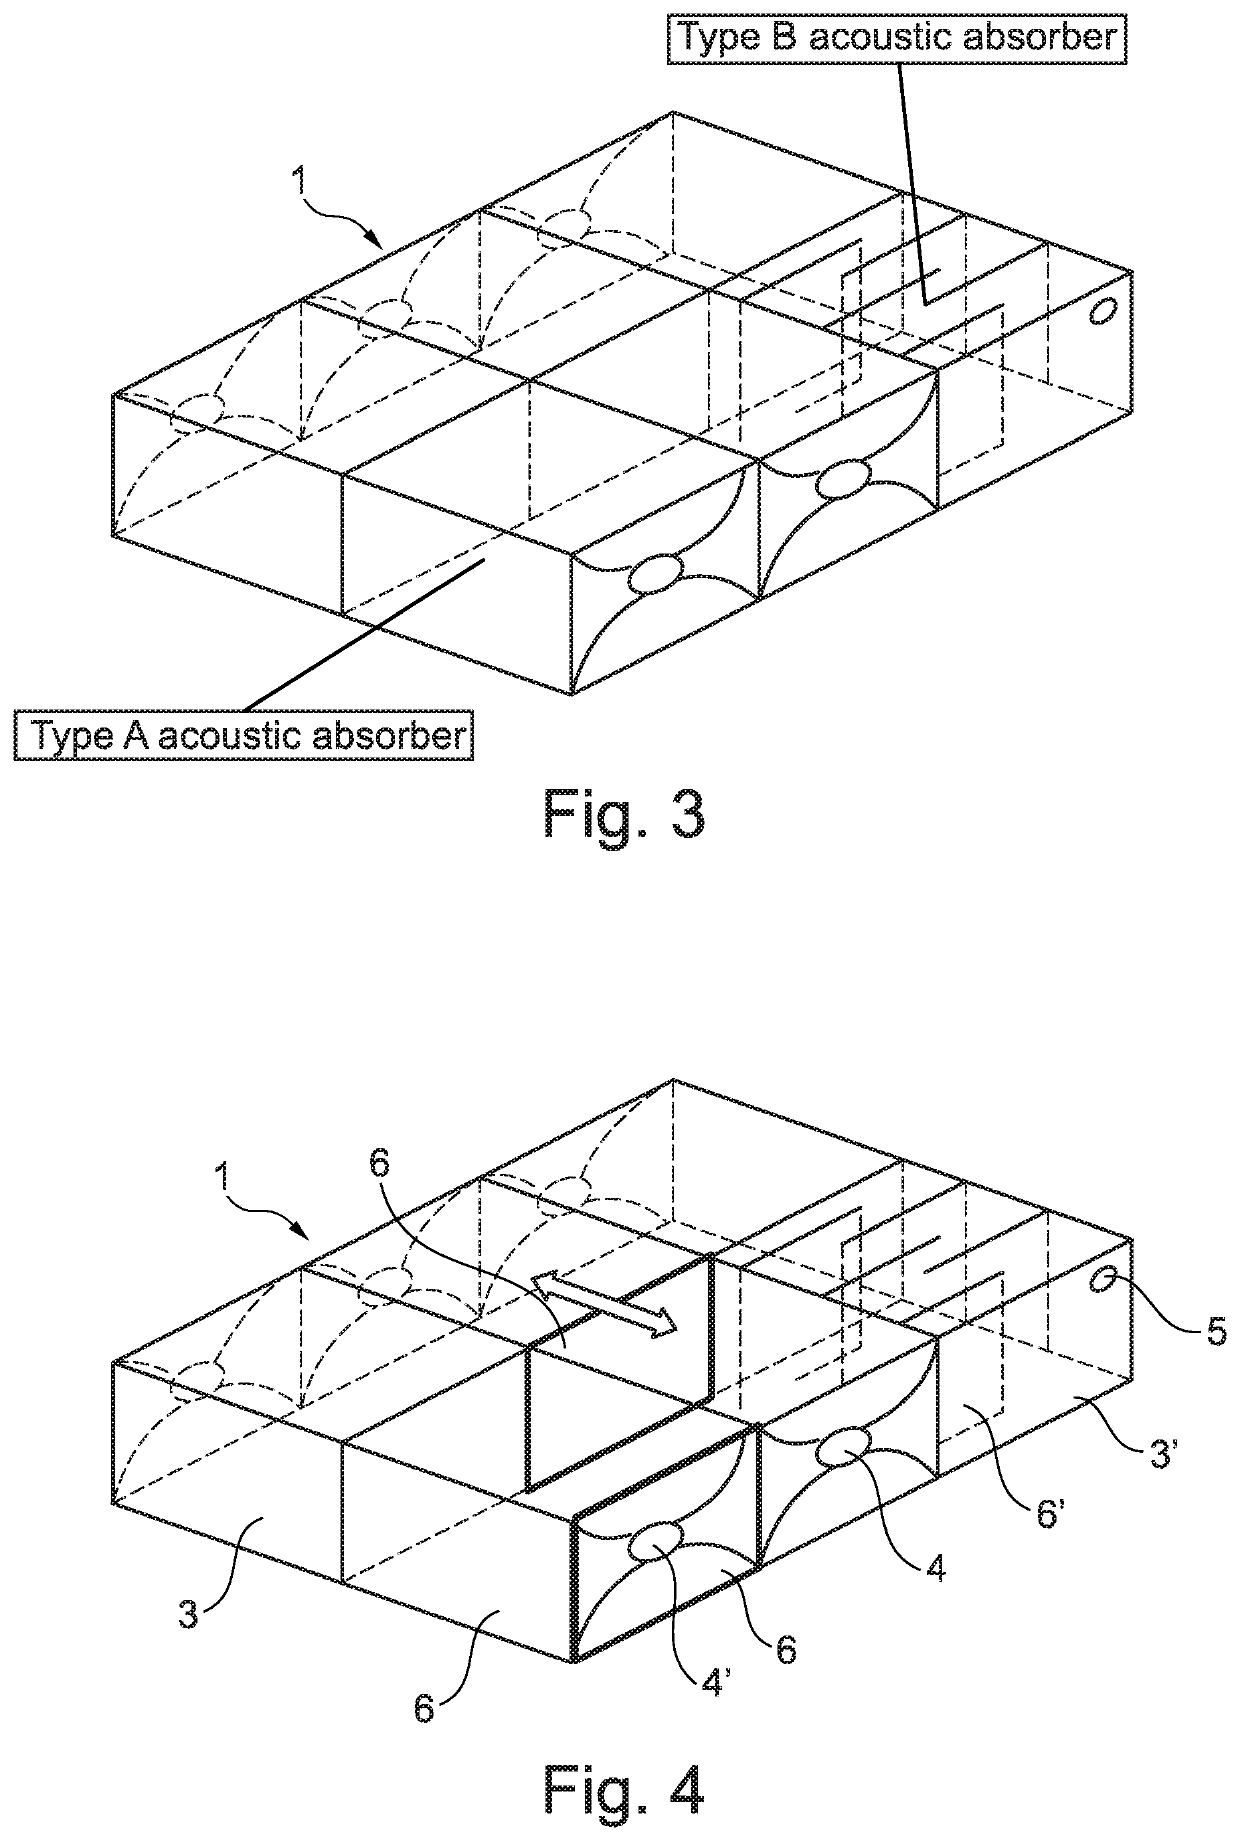 Modular acoustic protection arrangement and method for manufacturing such an acoustic protection arrangement